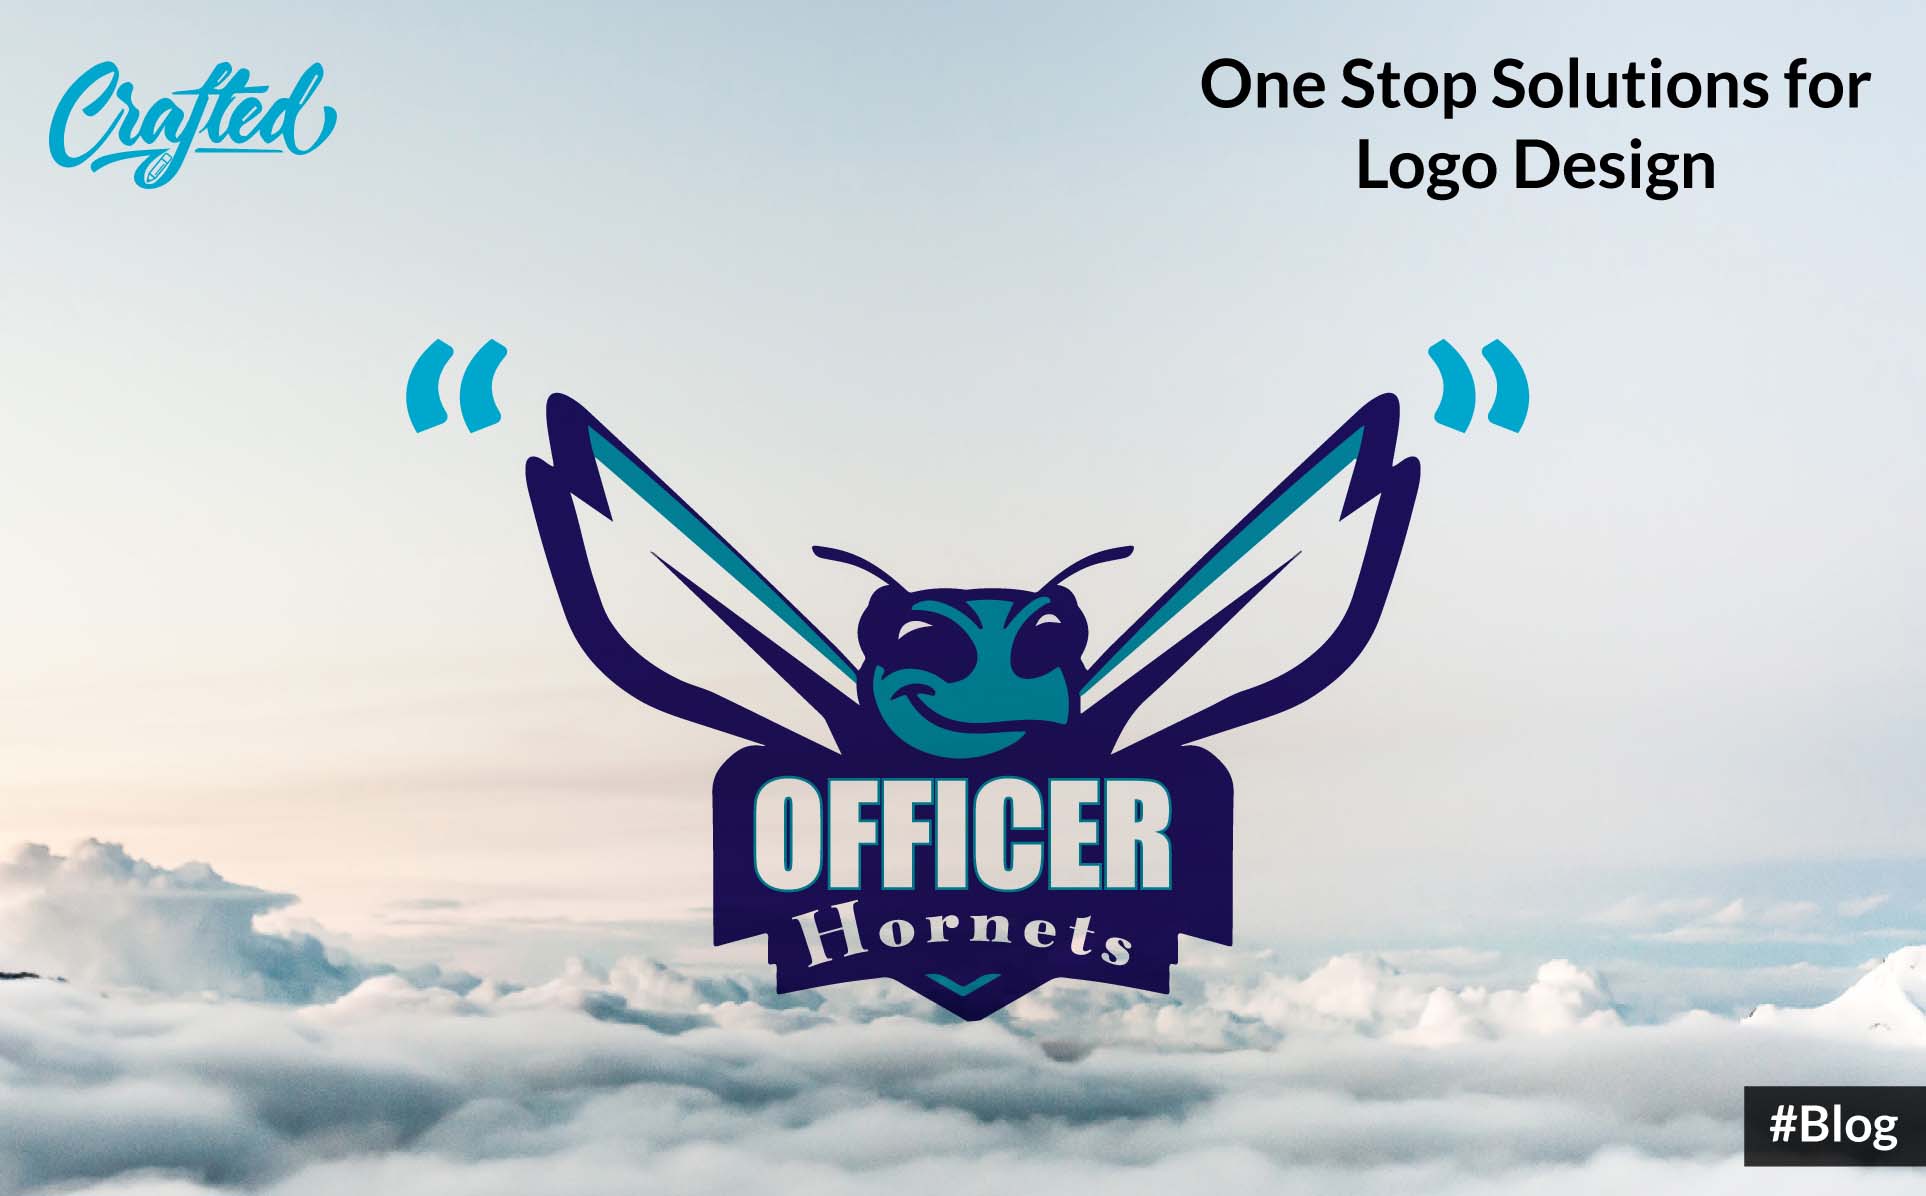 Solutions for Your Logo Design Problems